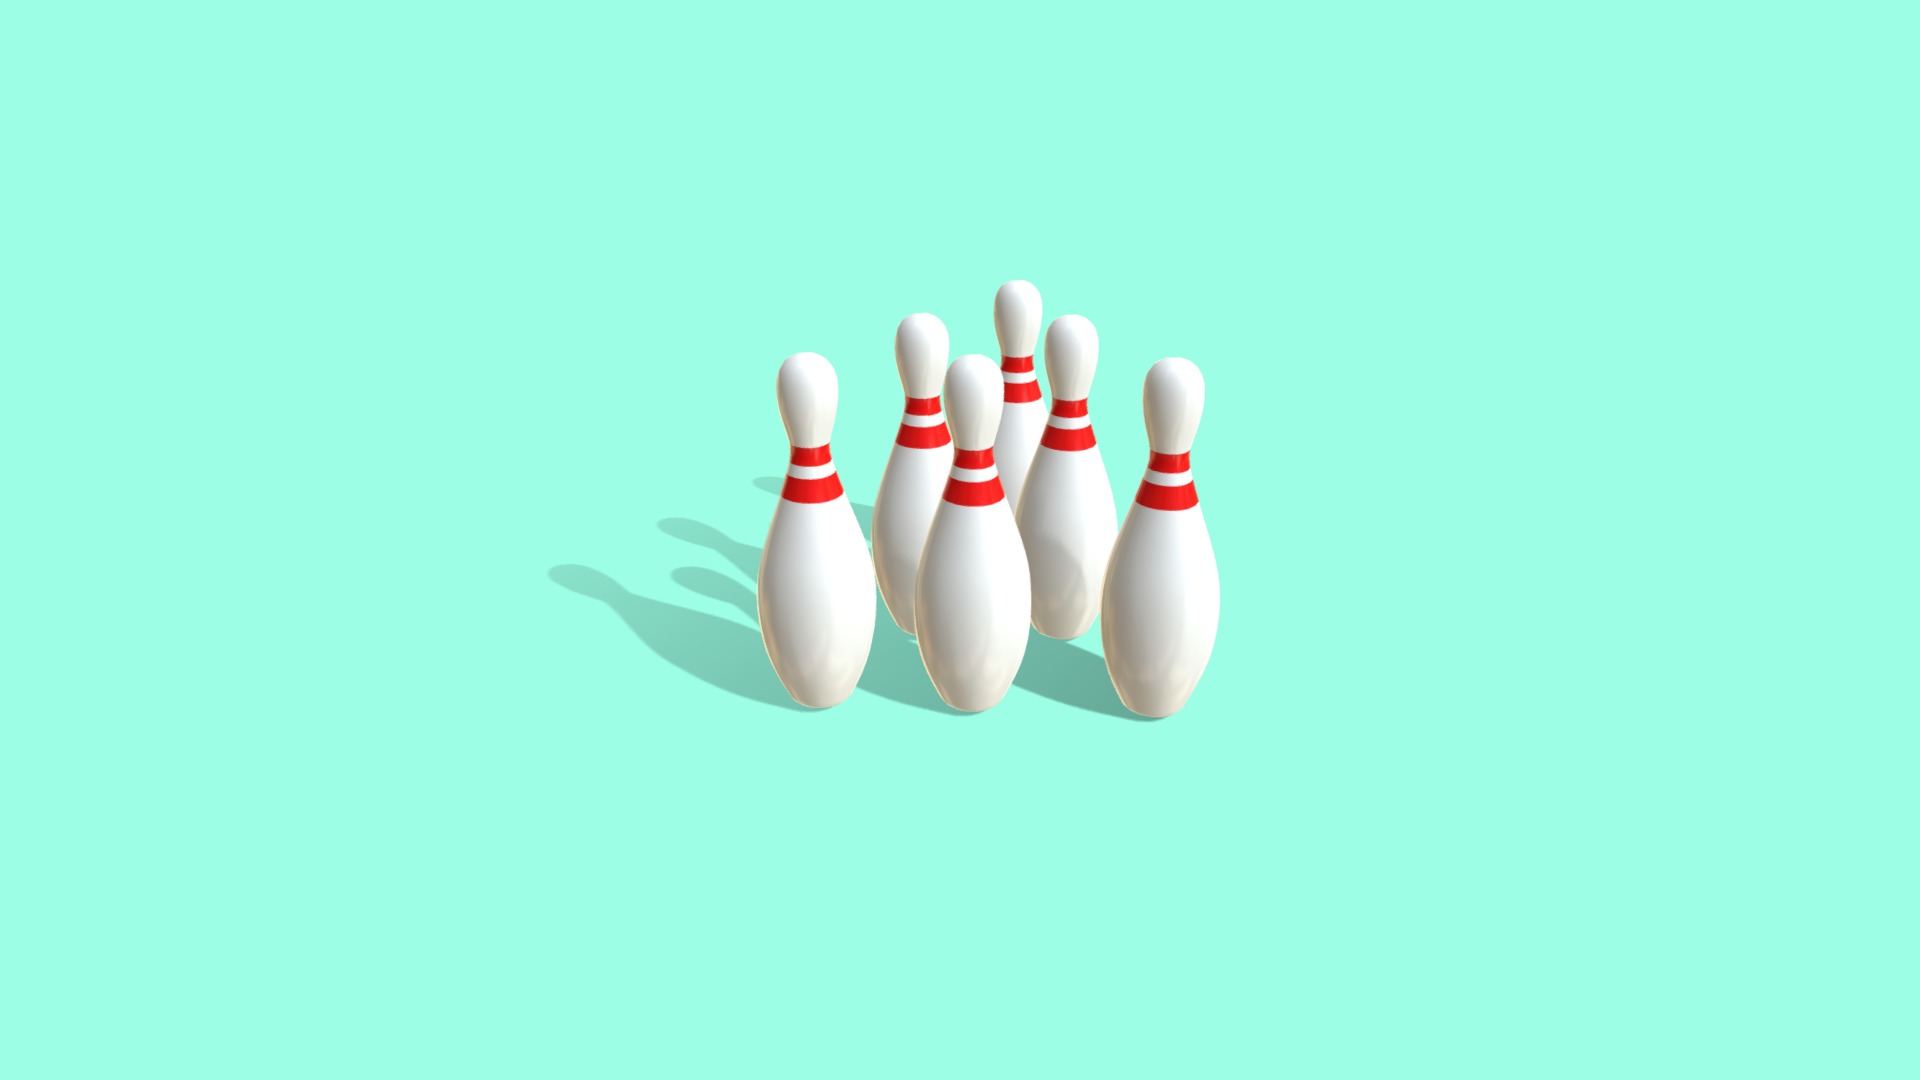 3D model Bowling - This is a 3D model of the Bowling. The 3D model is about a group of white and red bowling pins.